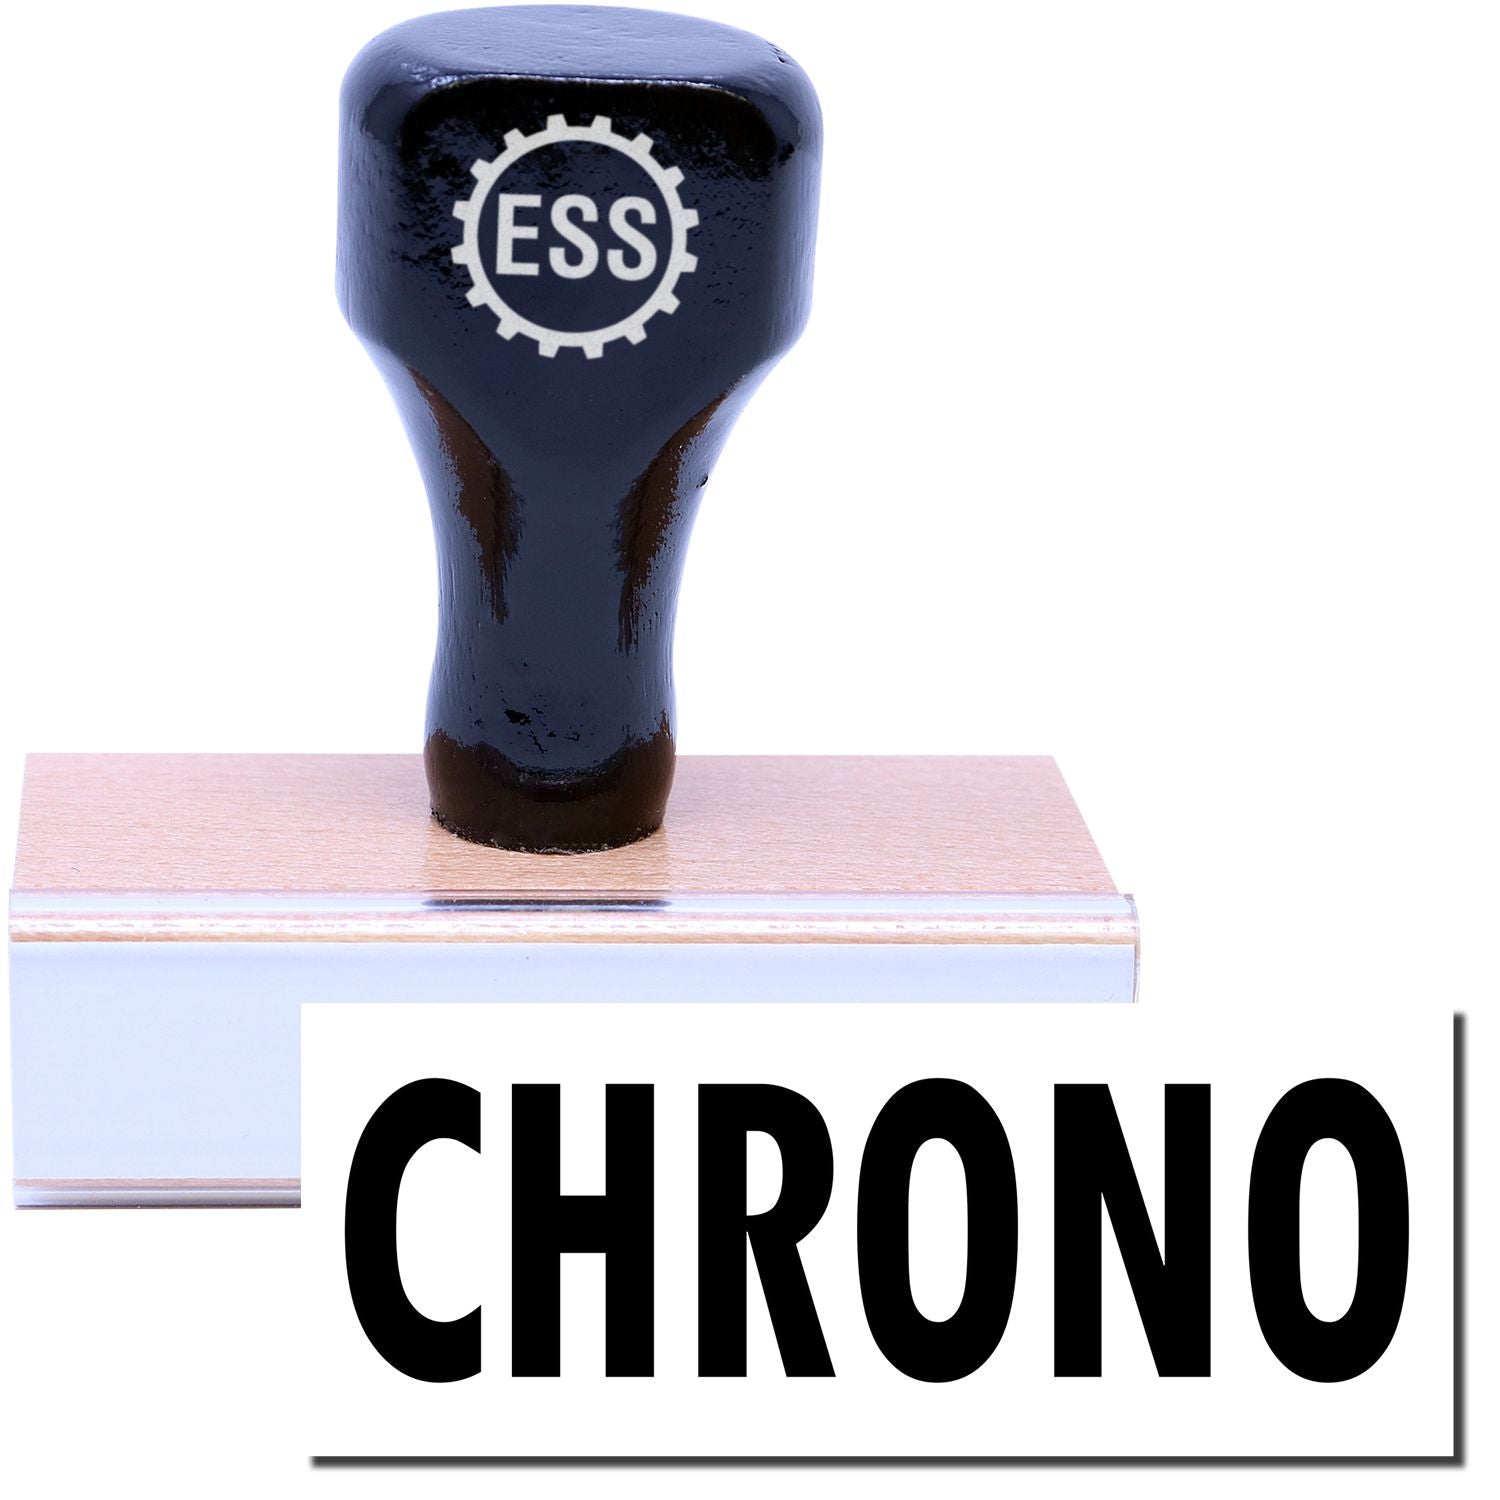 A stock office rubber stamp with a stamped image showing how the text "CHRONO" is displayed after stamping.